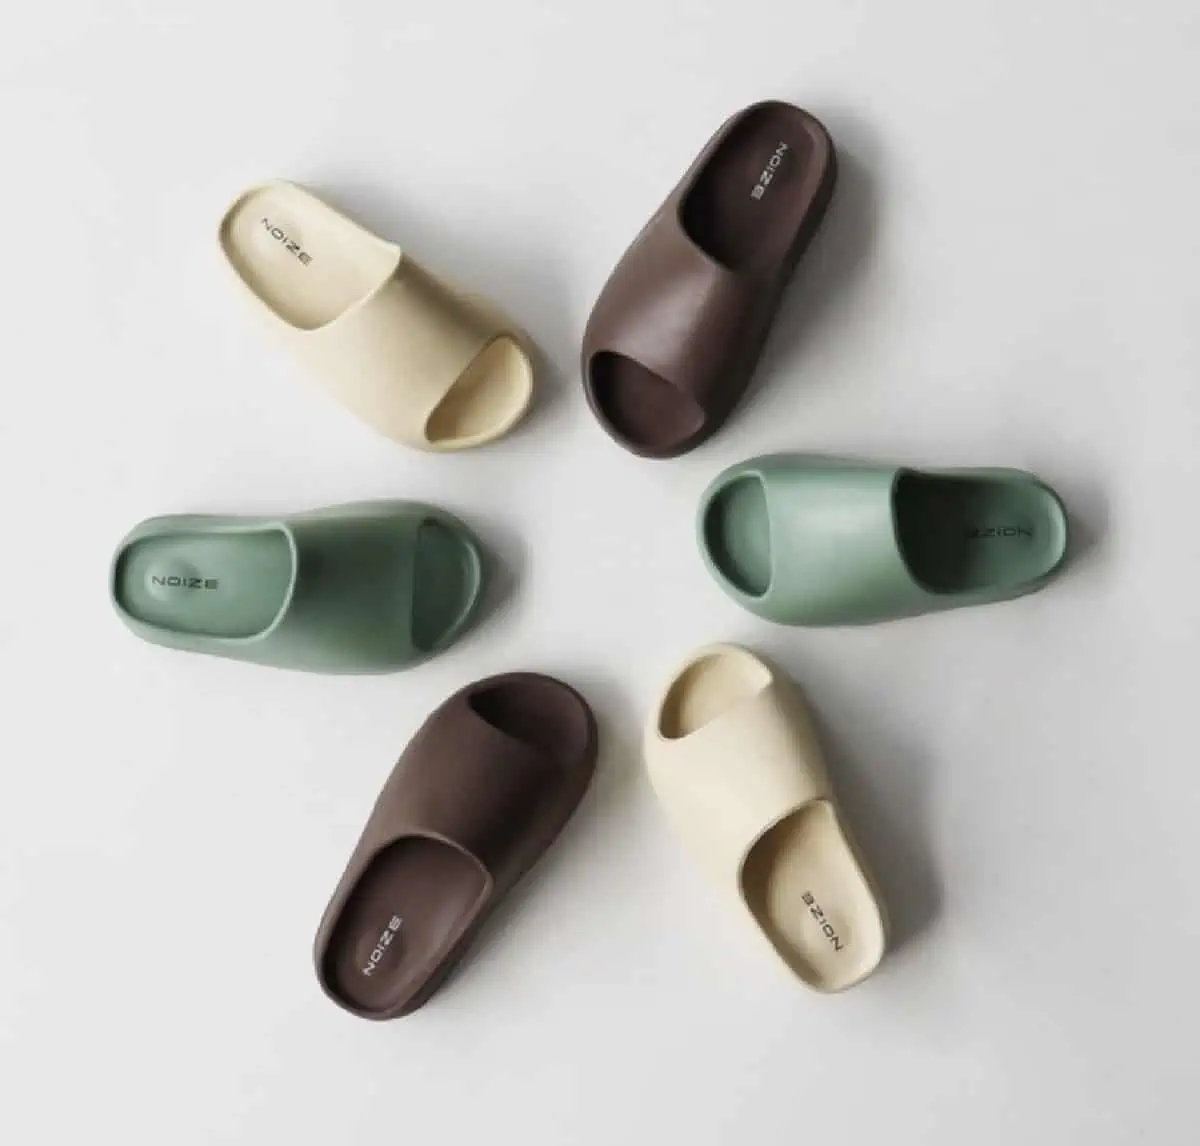 Six pairs of vegan-friendly NOIZE recycled slippers in beige, sage green, and brown arranged in a circle.